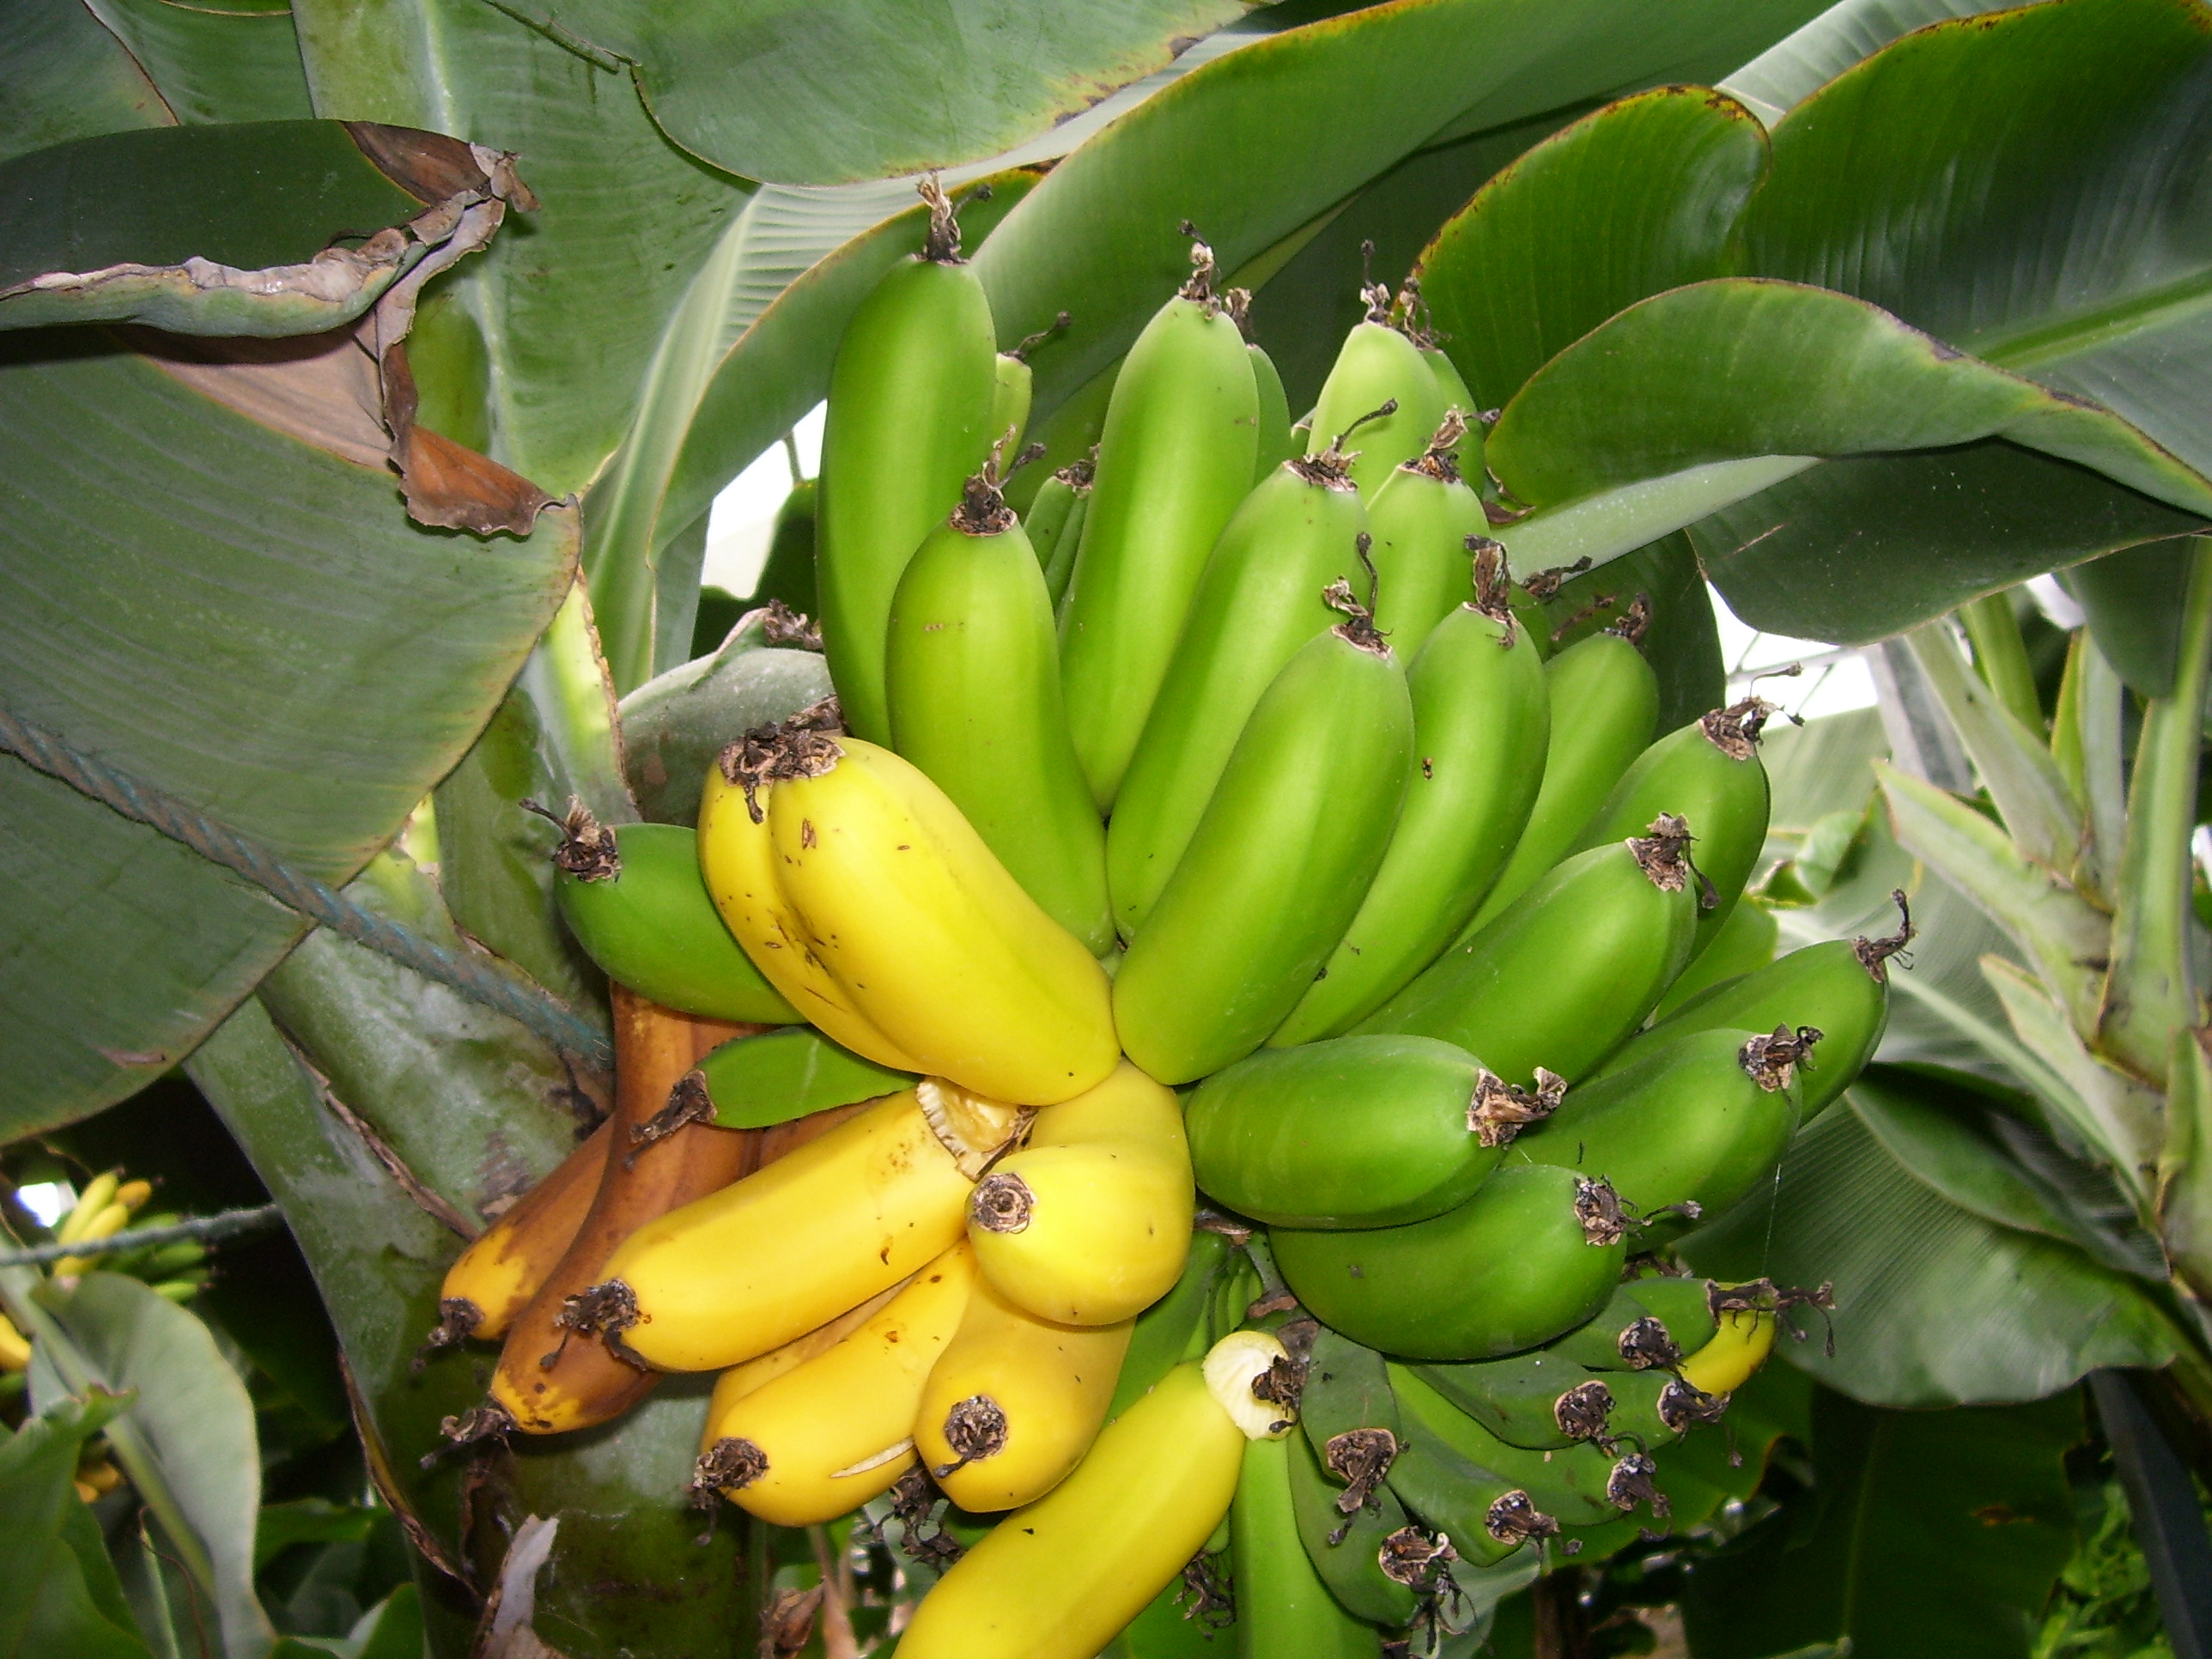 Bananas in Iceland